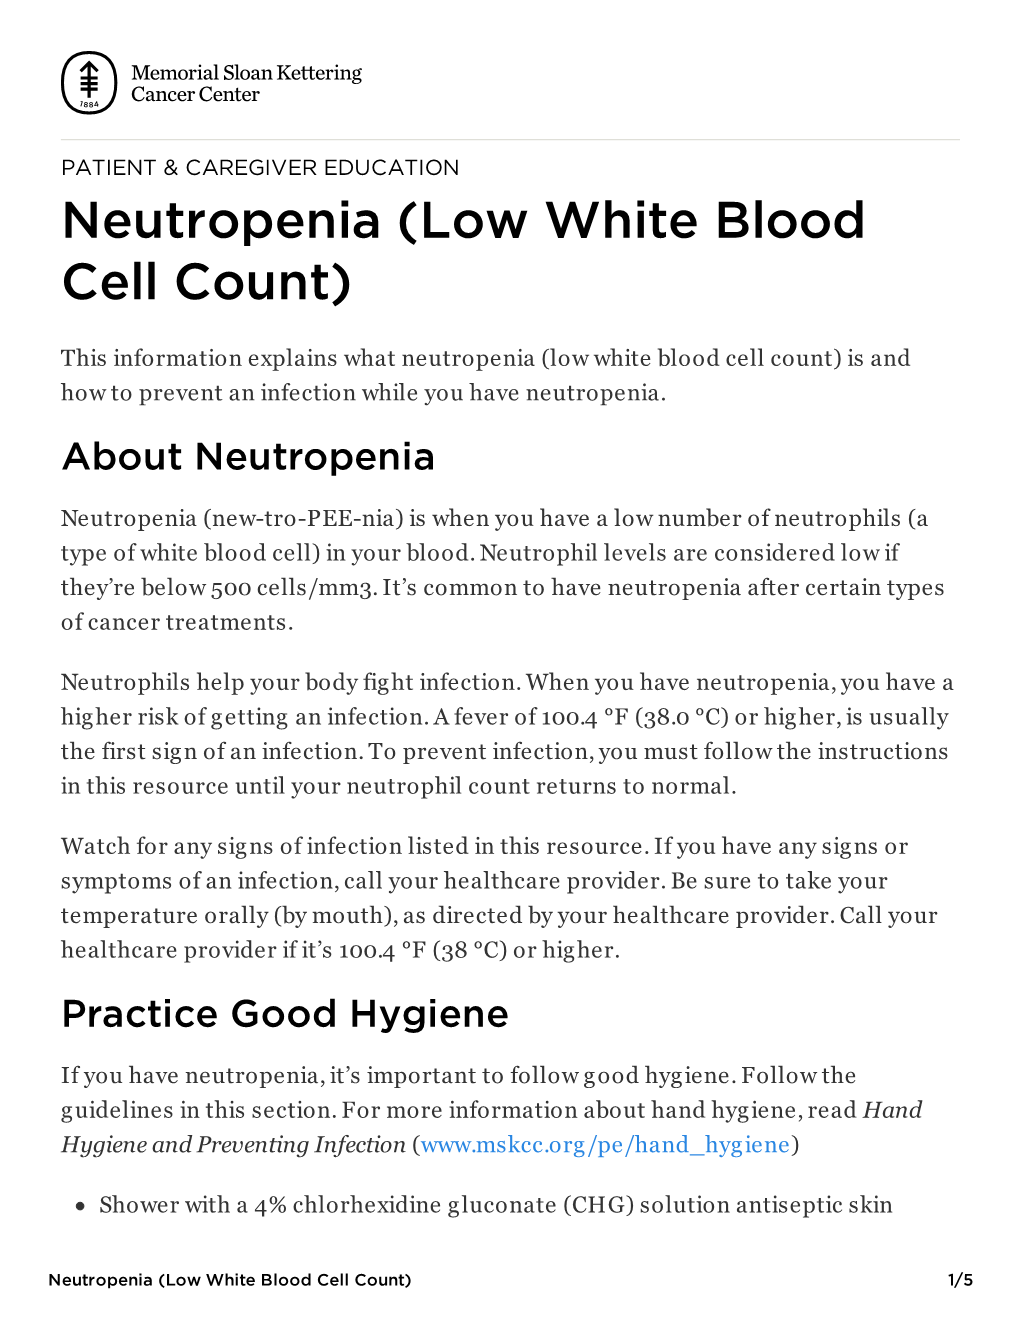 Neutropenia (Low White Blood Cell Count)